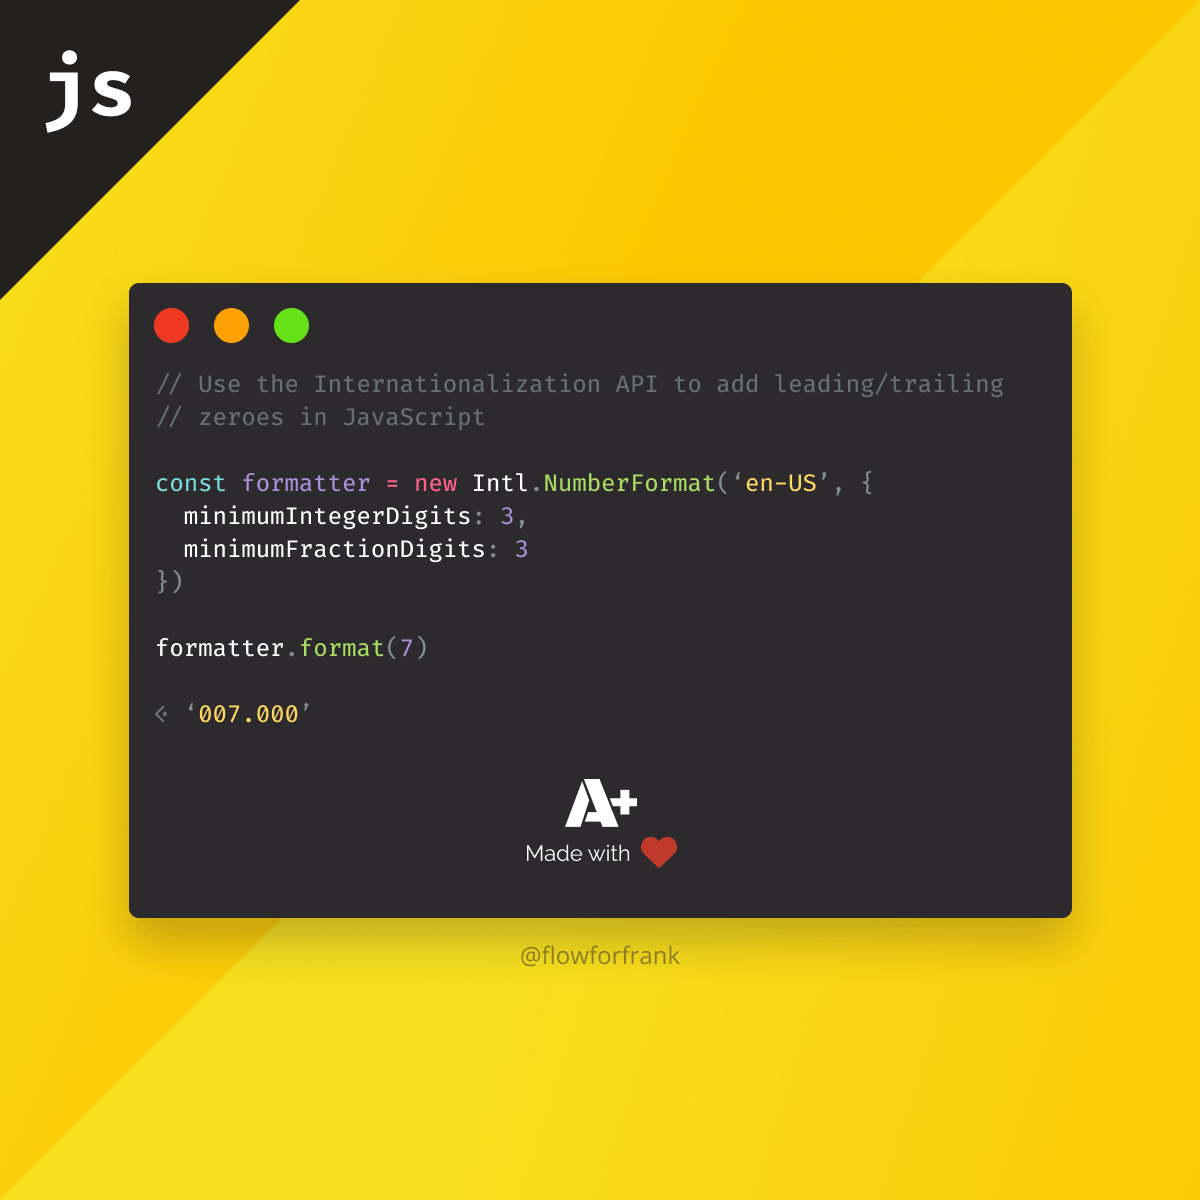 How to Add/Remove Leading/Trailing Zeroes in JavaScript